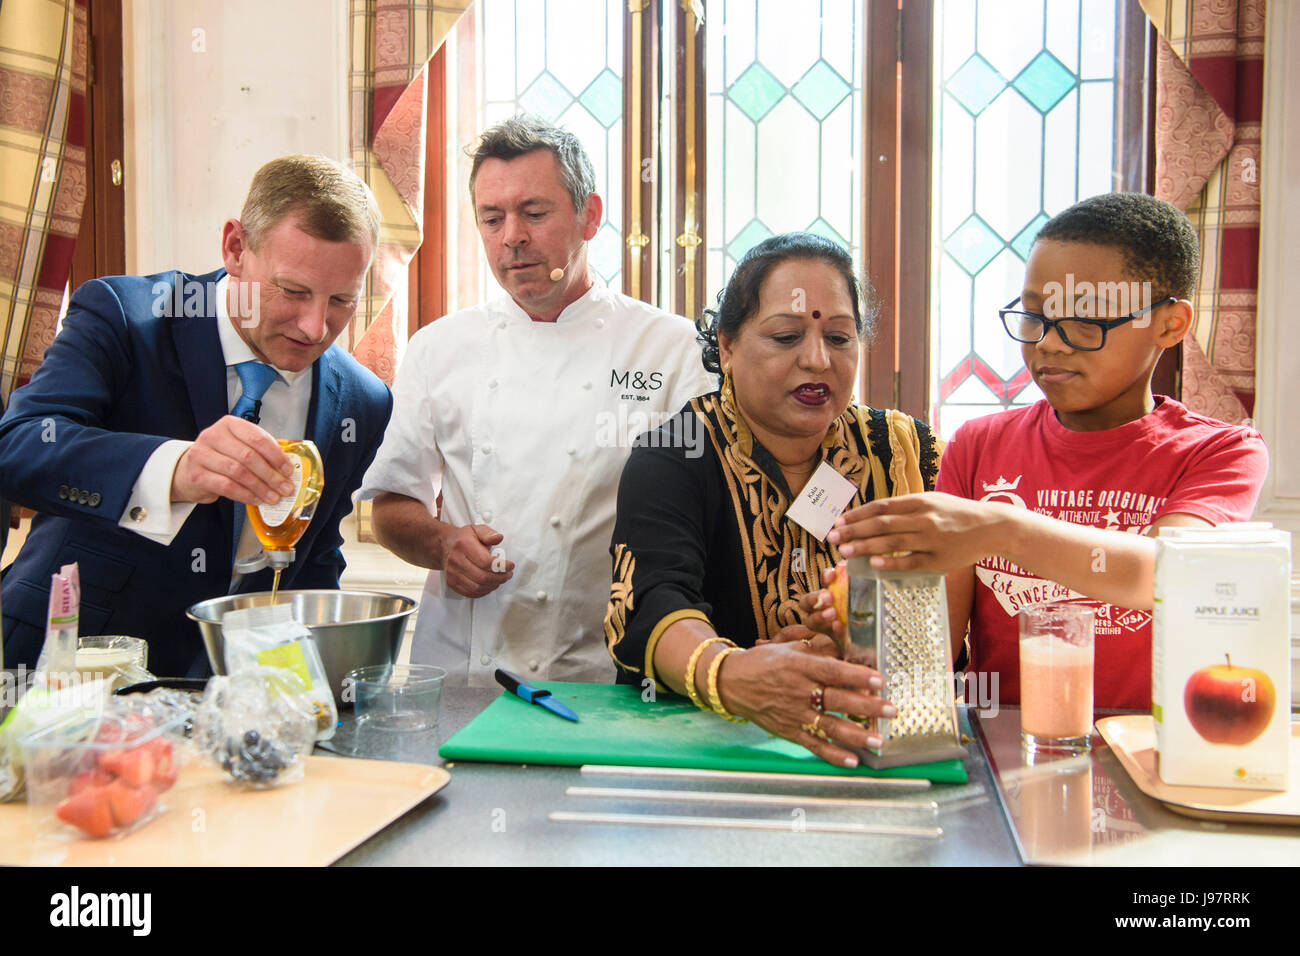 (l-r) M&S CEO Steve Rowe alongside chef Adam Palmer and Newham residents Kala Mehra, and Shakir, aged 8, prepare a breakfast made with food surplus, at the launch of M&S's new Community Transformation Programme, at Stratford Old Town Hall in east London. PRESS ASSOCIATION Photo. Picture date: Thursday June 1st, 2017. The extensive programme will include support for schoolchildren, charities and older people with a target of supporting 1000 communities by 2025. Stock Photo